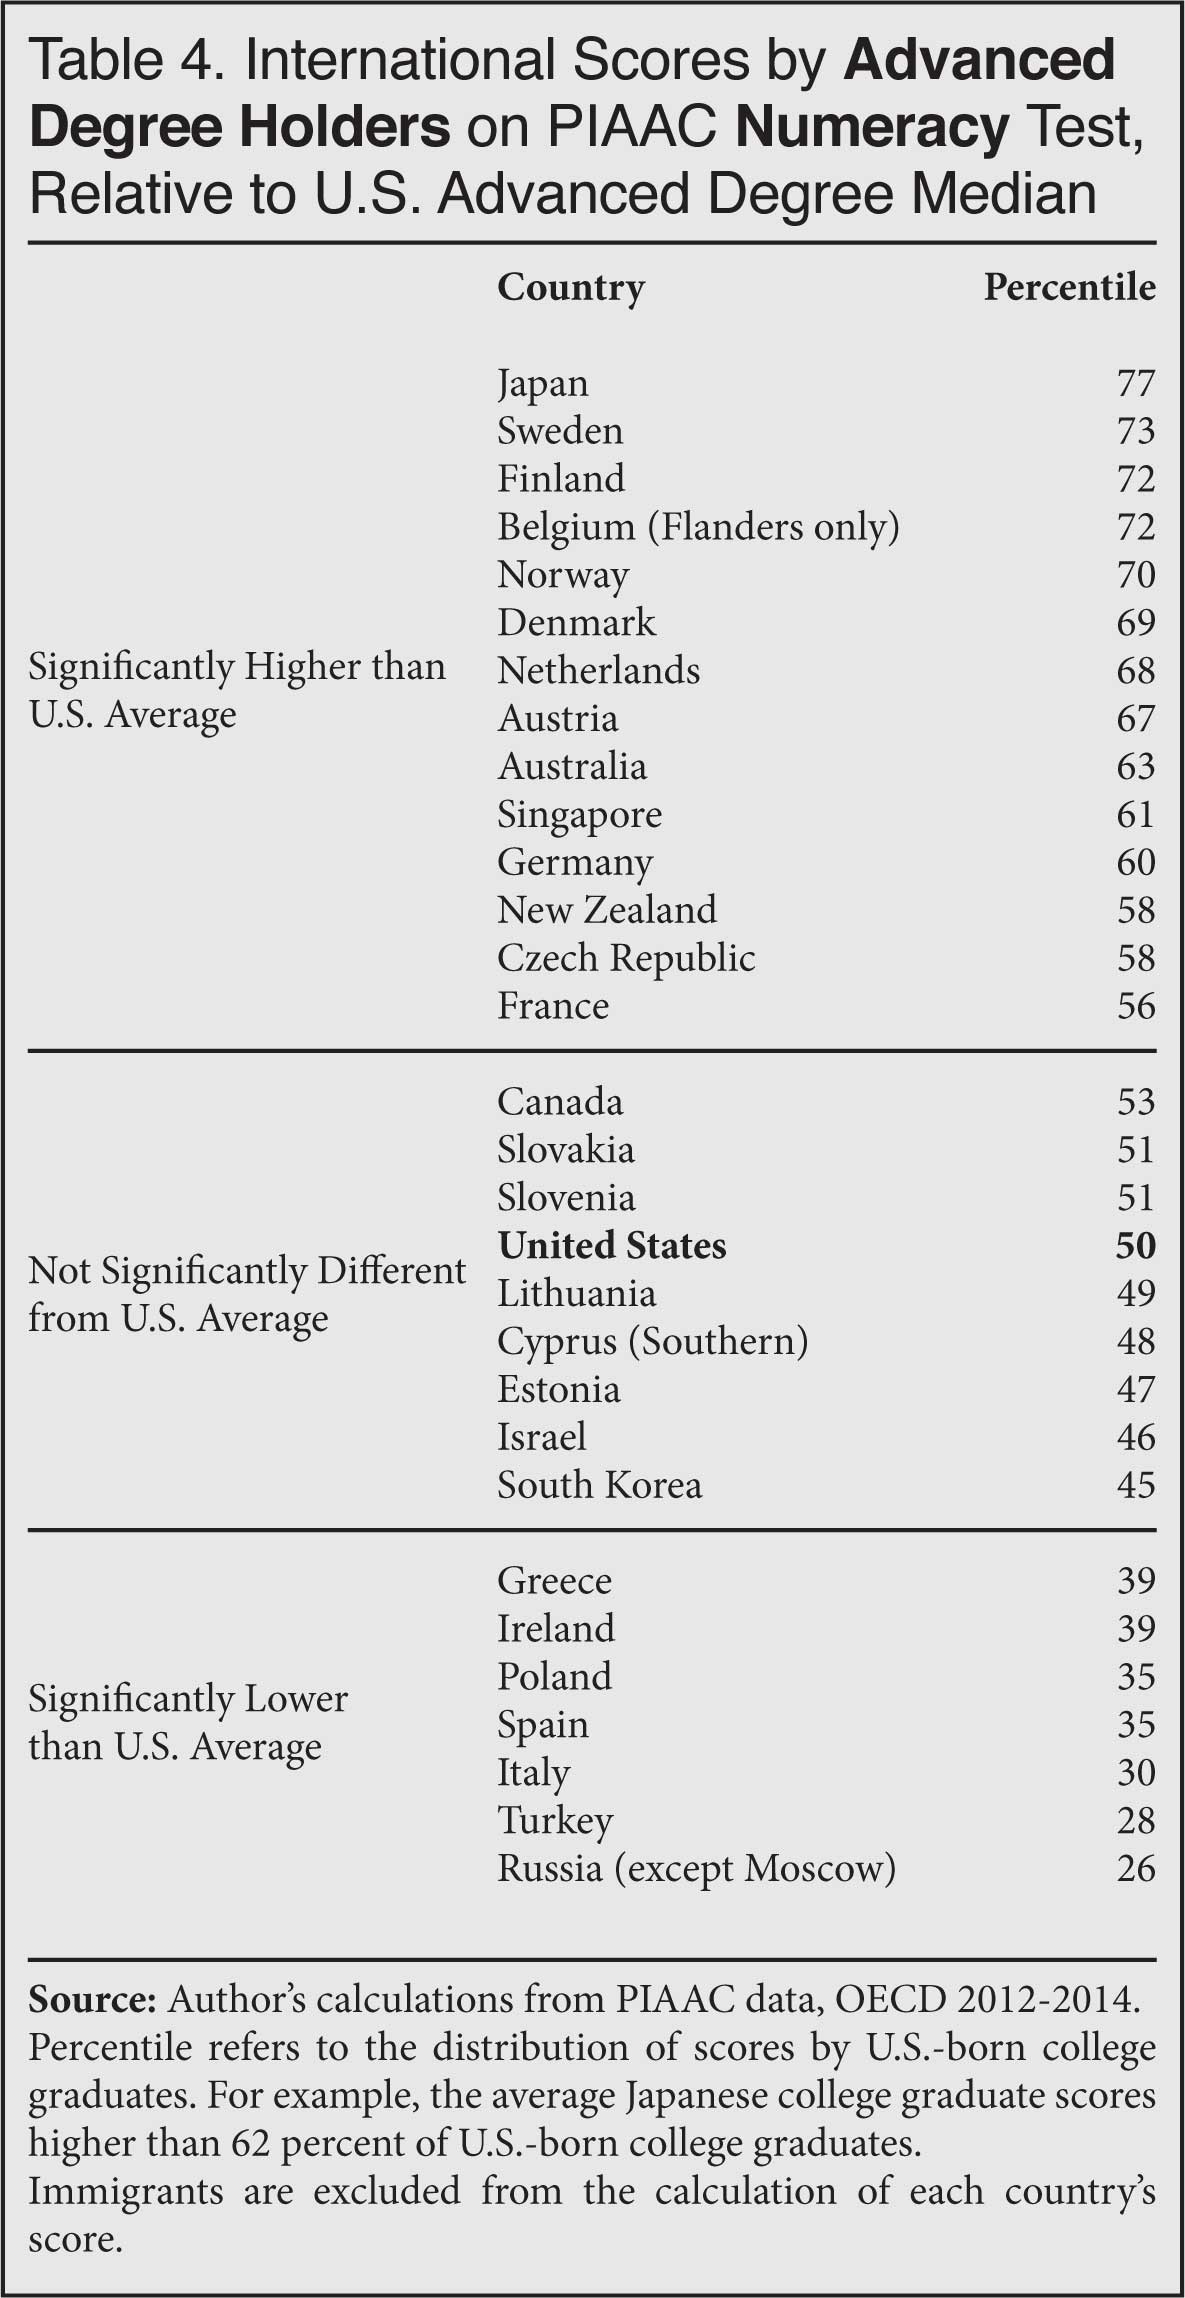 Table: International Scores by Advanced Degree Holders on PIAAC Numeracy Test, Relative to US Advanced Degree Holders